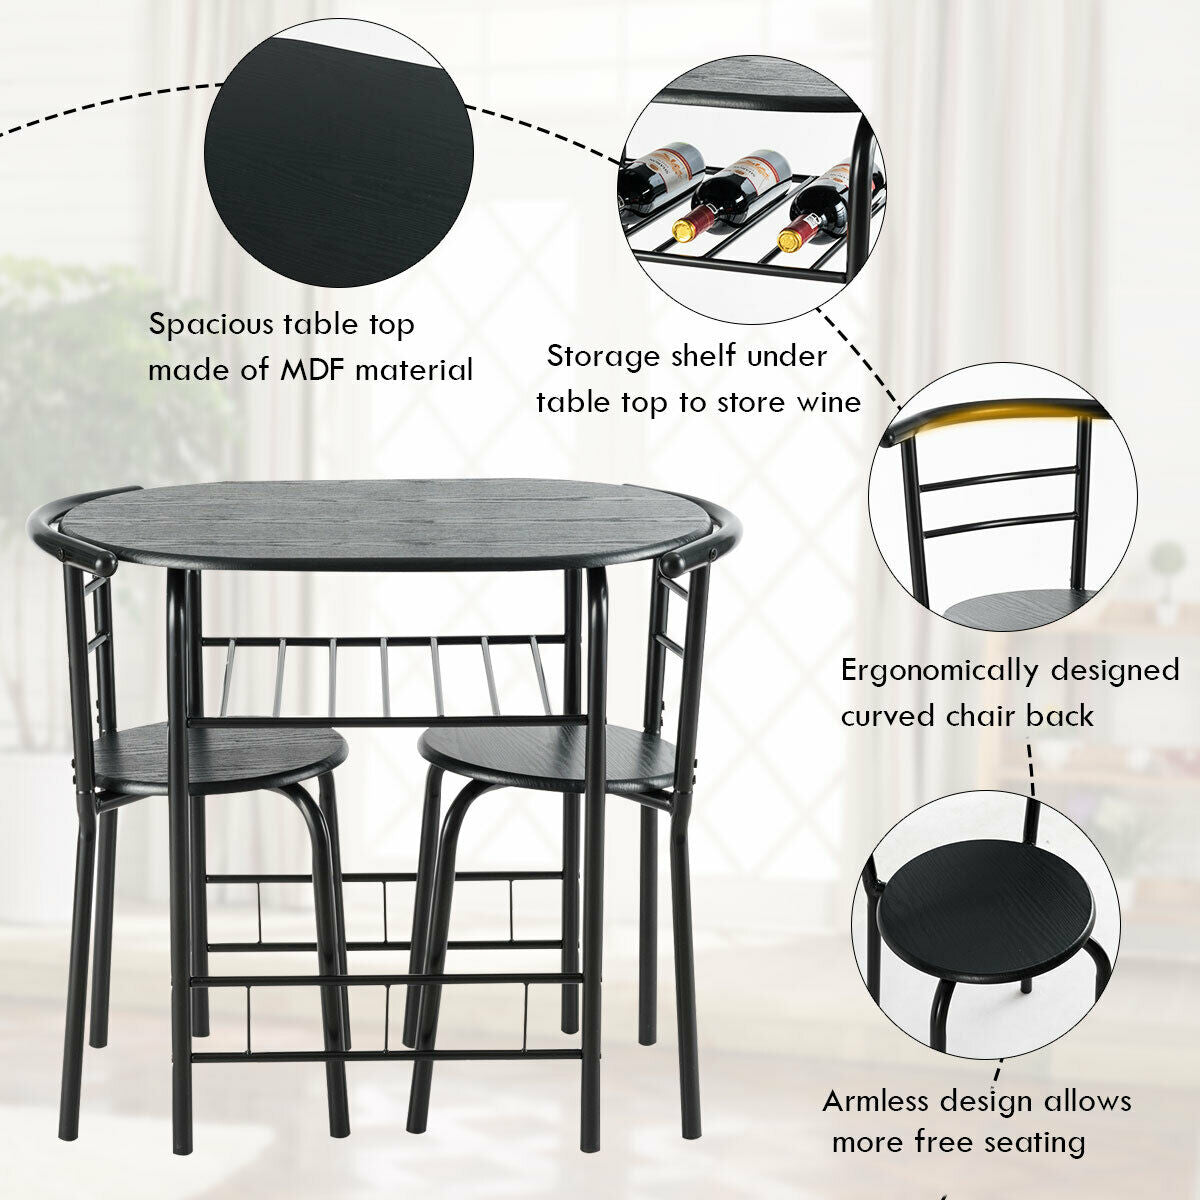 Sturdy and Stable Construction: Constructed with a reinforced and rustproof steel frame, this space-saving bistro set offers reliable stability. The table can support up to 220 lbs, while each chair can hold up to 265 lbs. Additional support bars and anti-slip foot pads further enhance stability. The high-quality MDF surface is easy to clean.